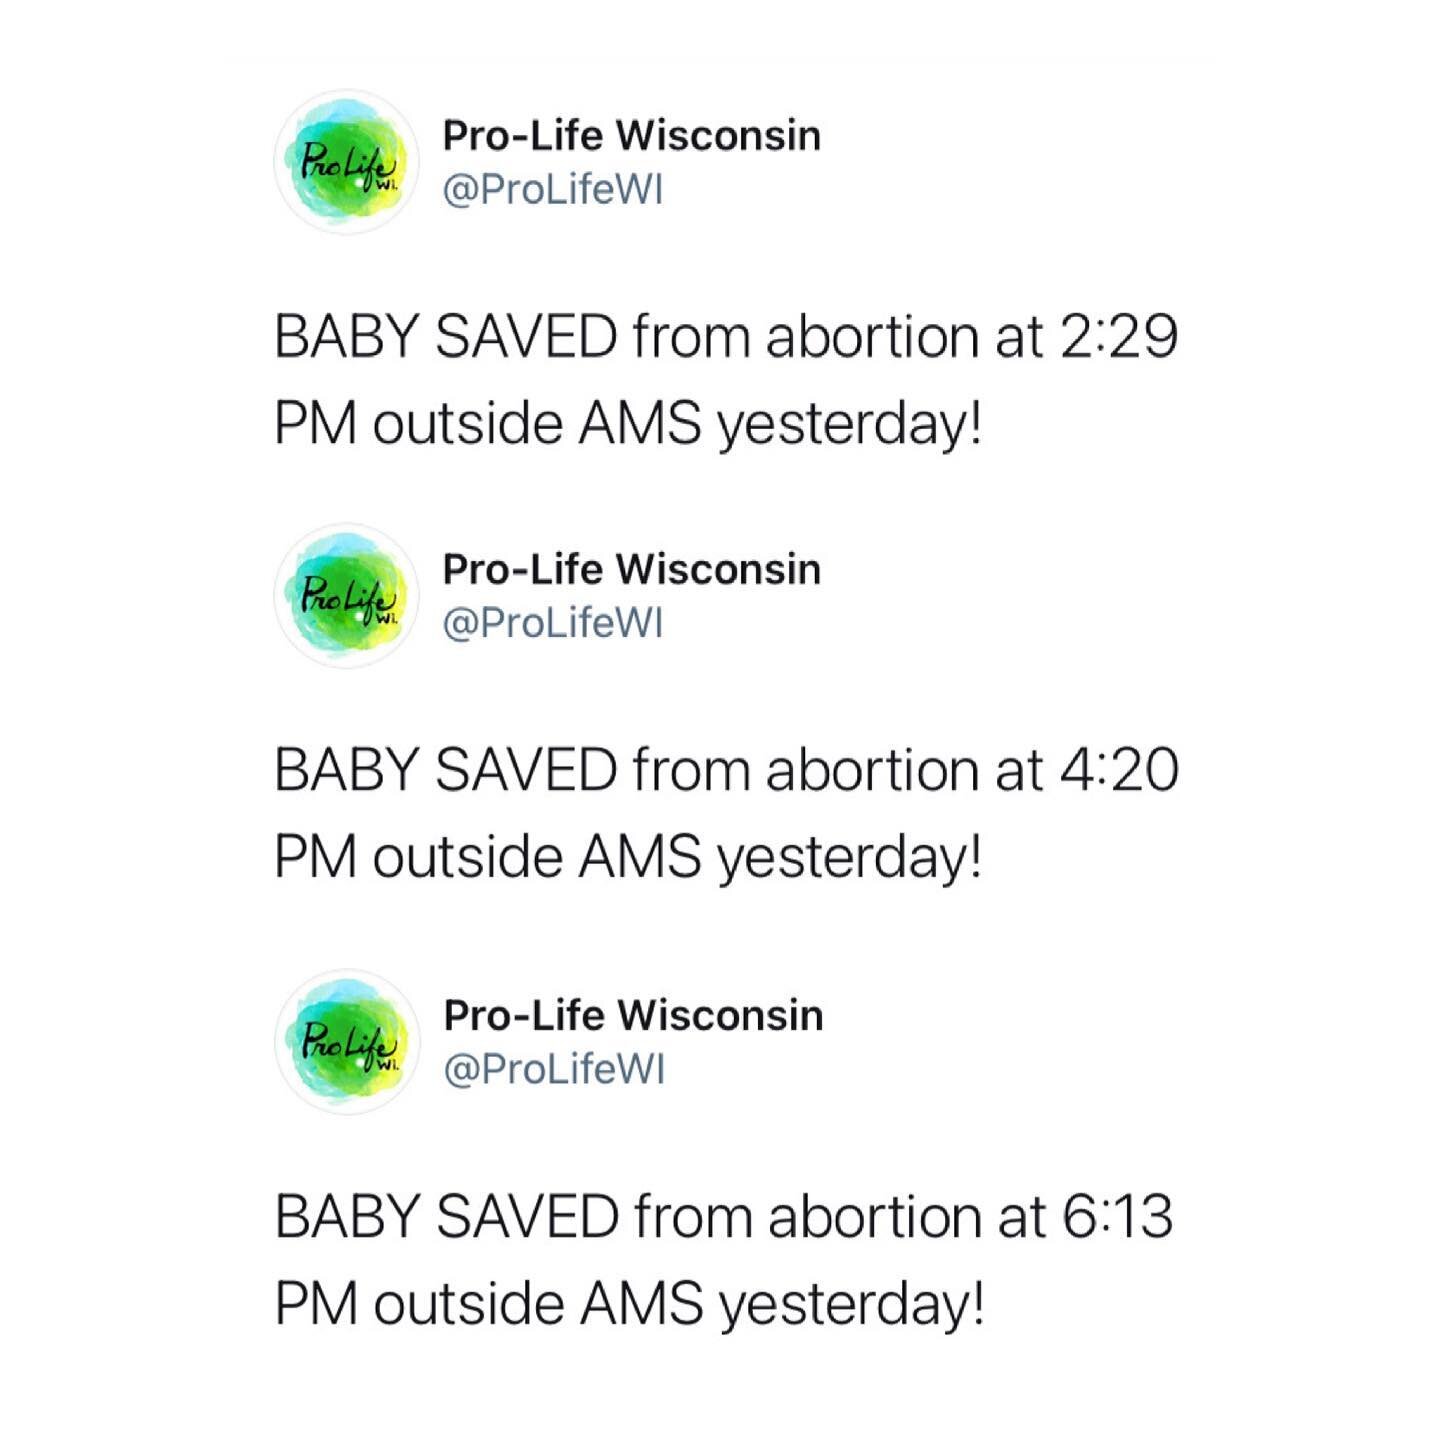 THREE babies were saved from abortion yesterday! Because of your prayers and the work of our sidewalk counselors, these precious lives were saved and the abortion-minded men and women were spared from the trauma of abortion. #SaveLives